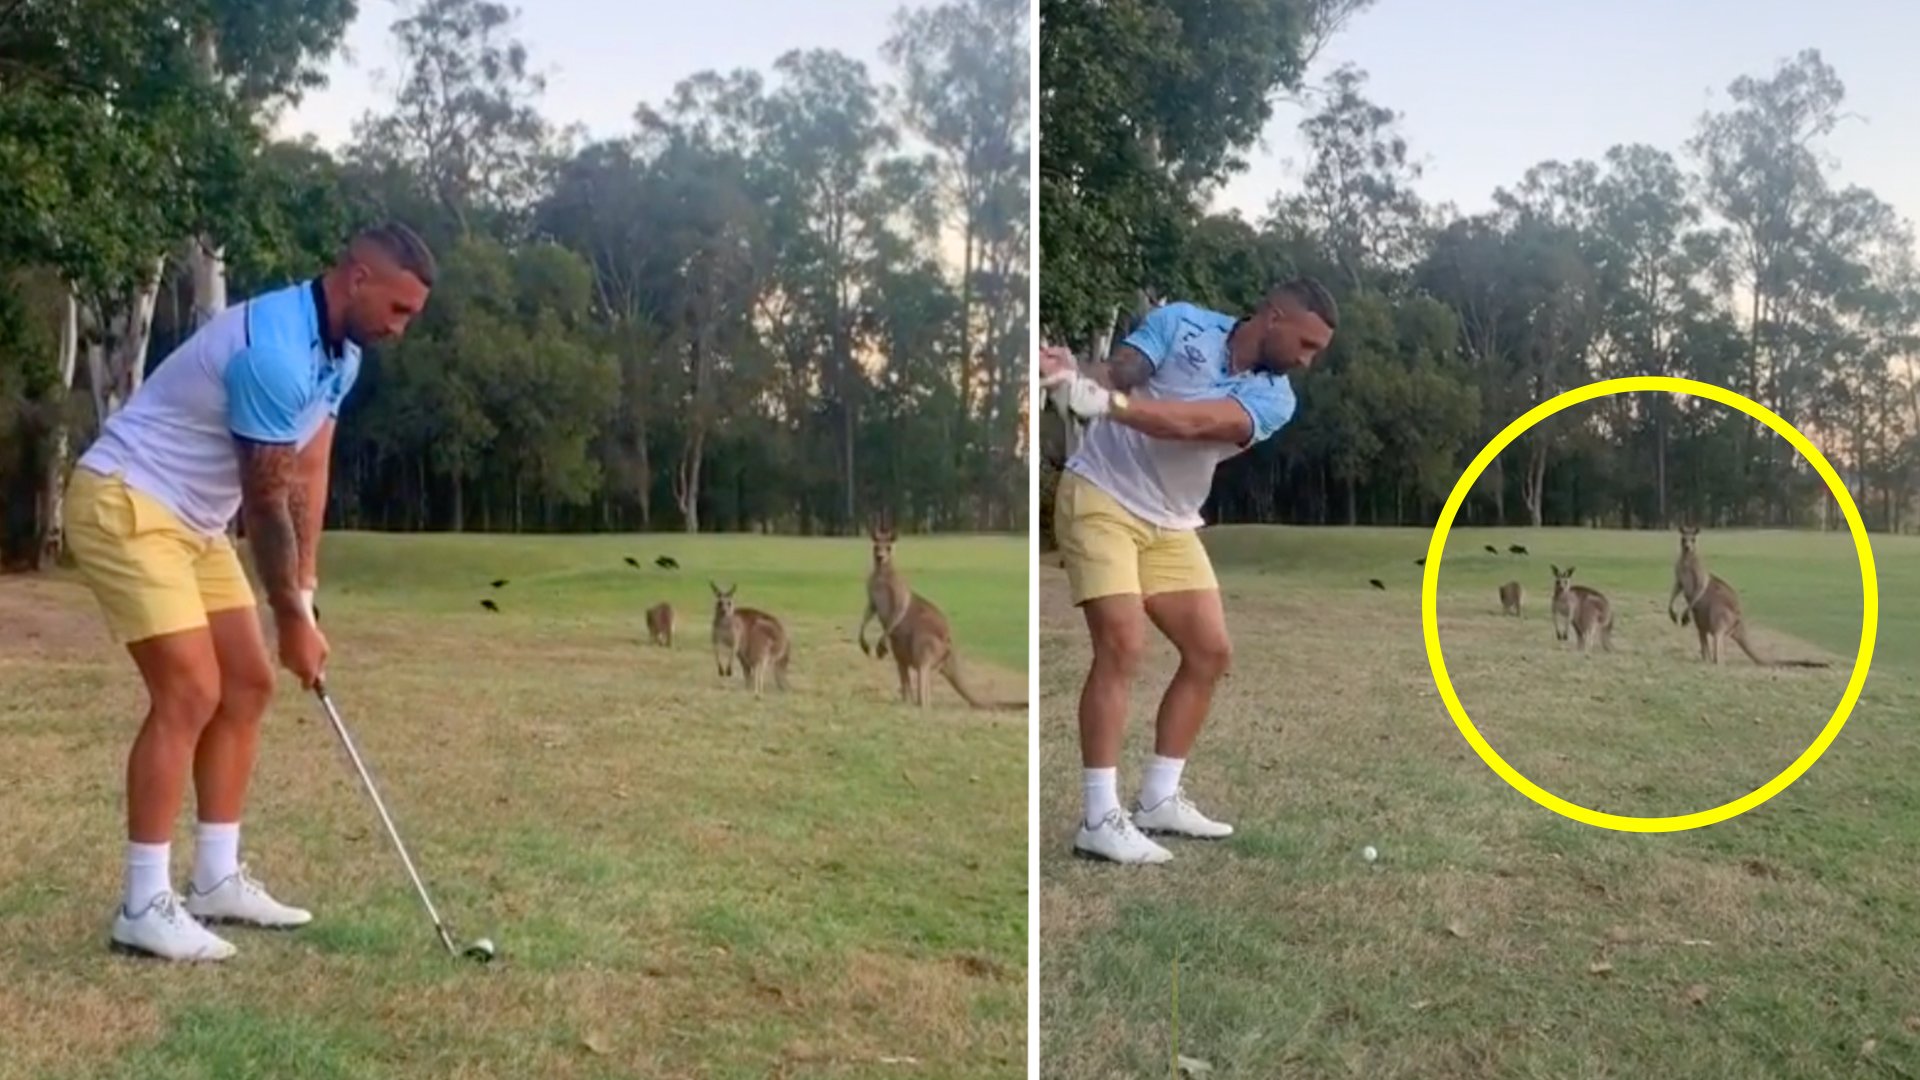 Quade Cooper experiences shock backlash from viral video of him playing golf